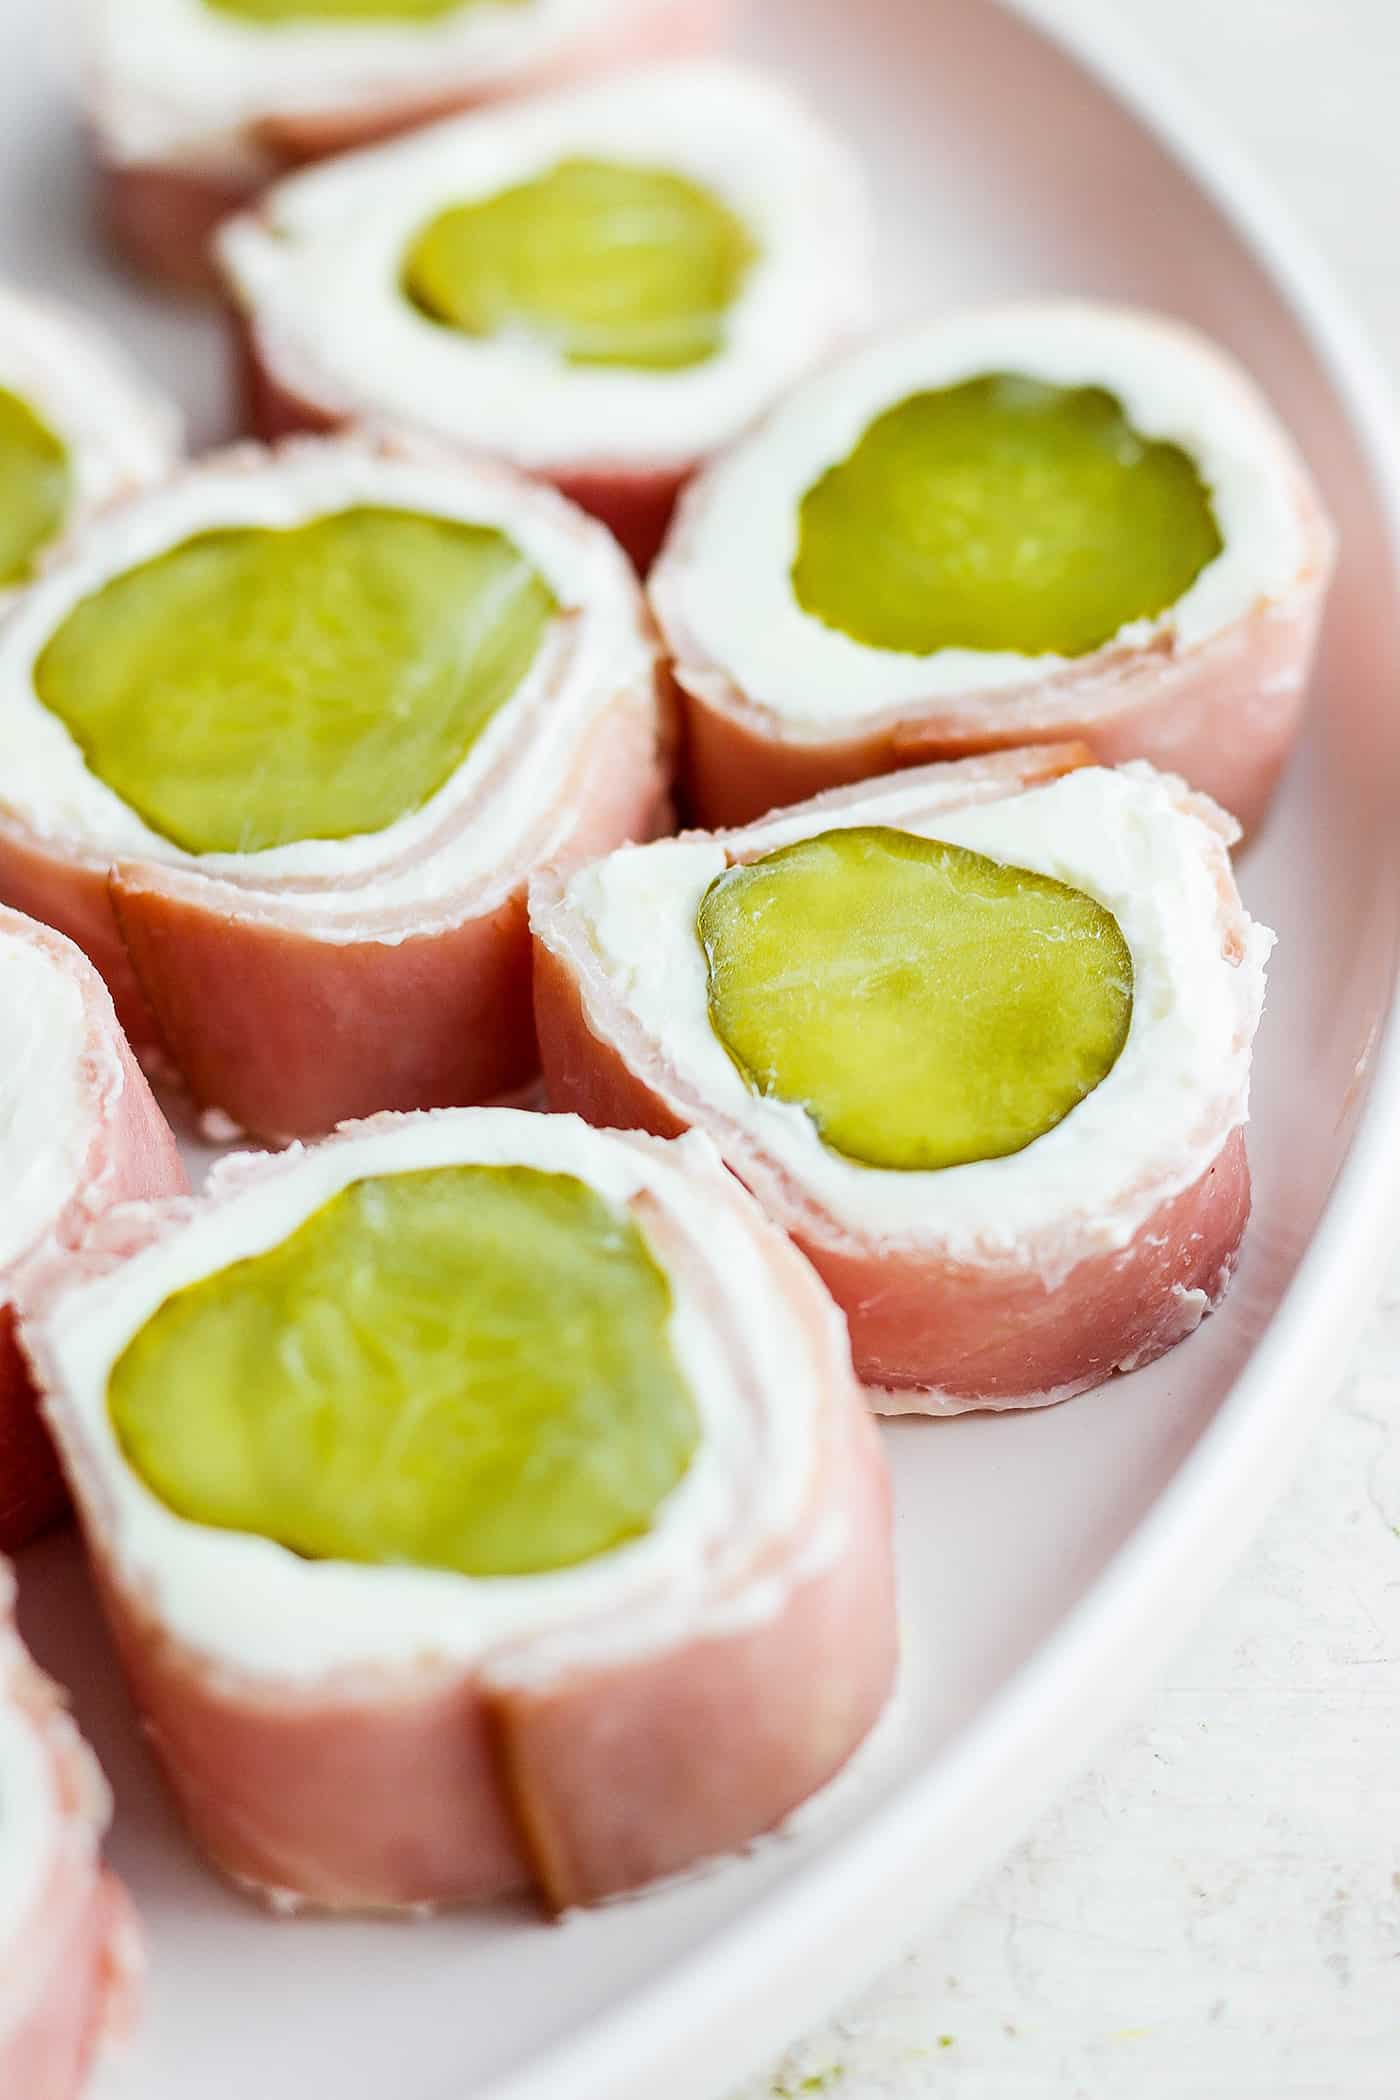 Pickle roll up are shown on a plate.